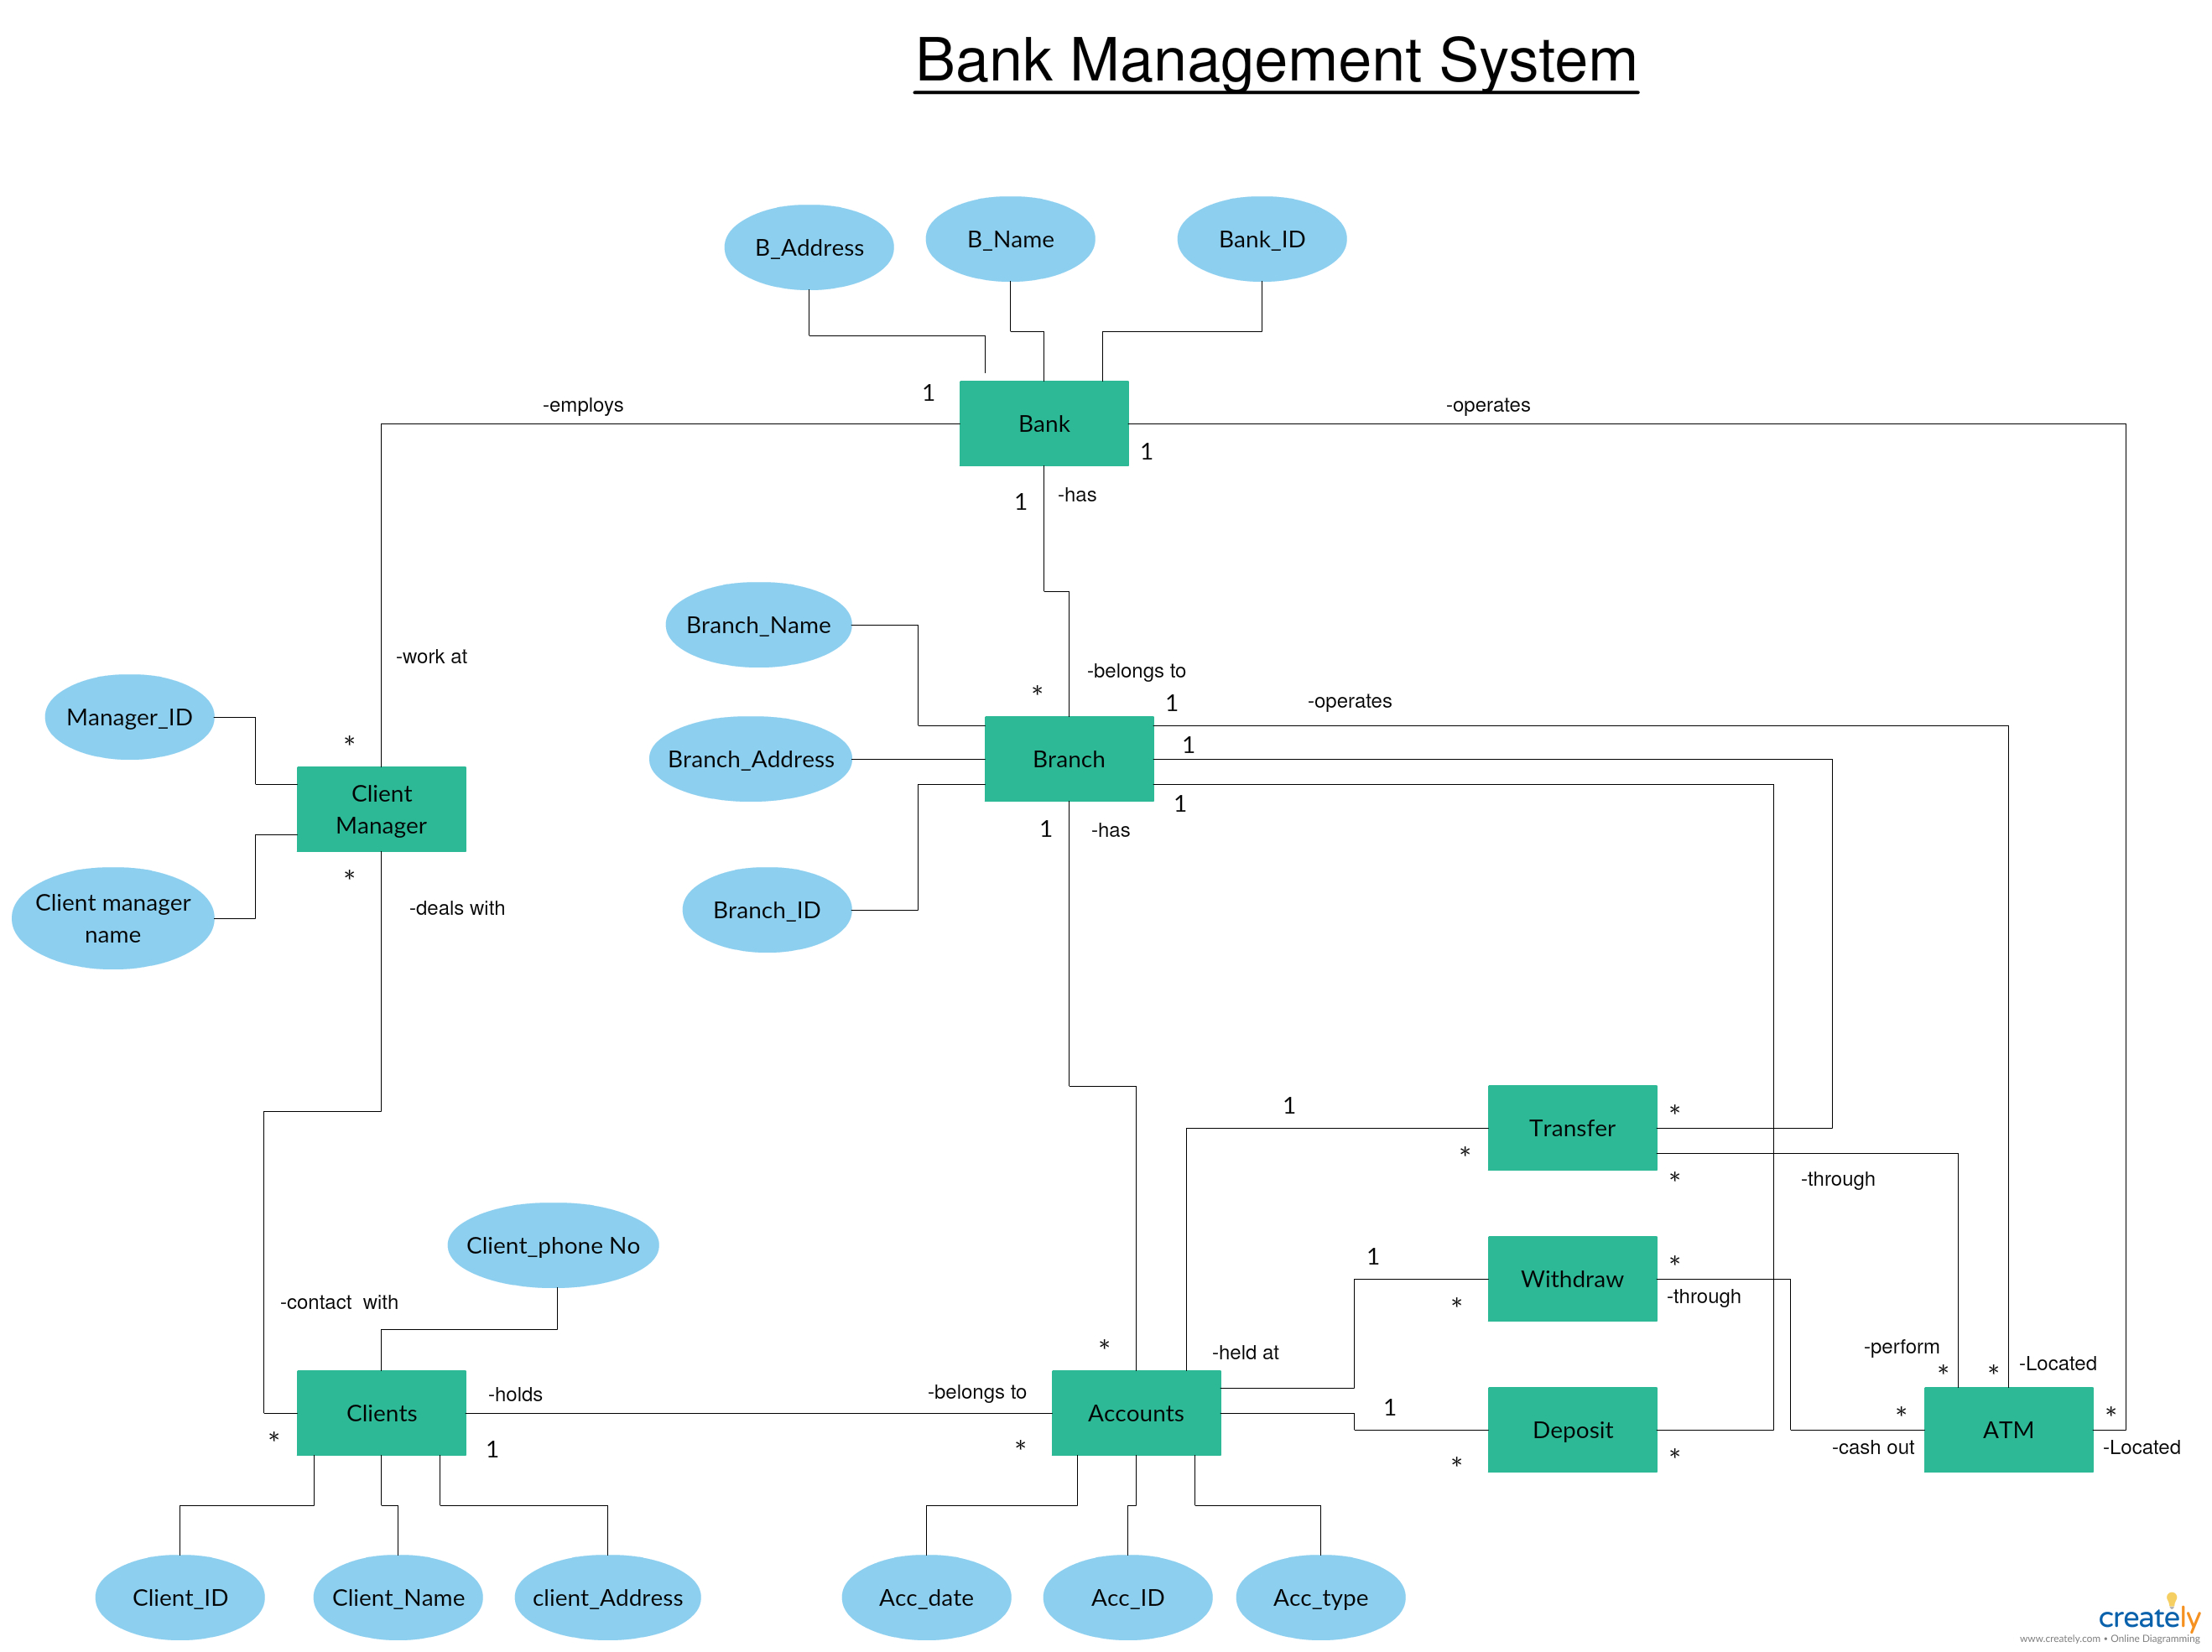 Er Diagram Tutorial | Guides And Tutorials | Diagram, Bar with regard to Draw An Er Diagram For Banking System